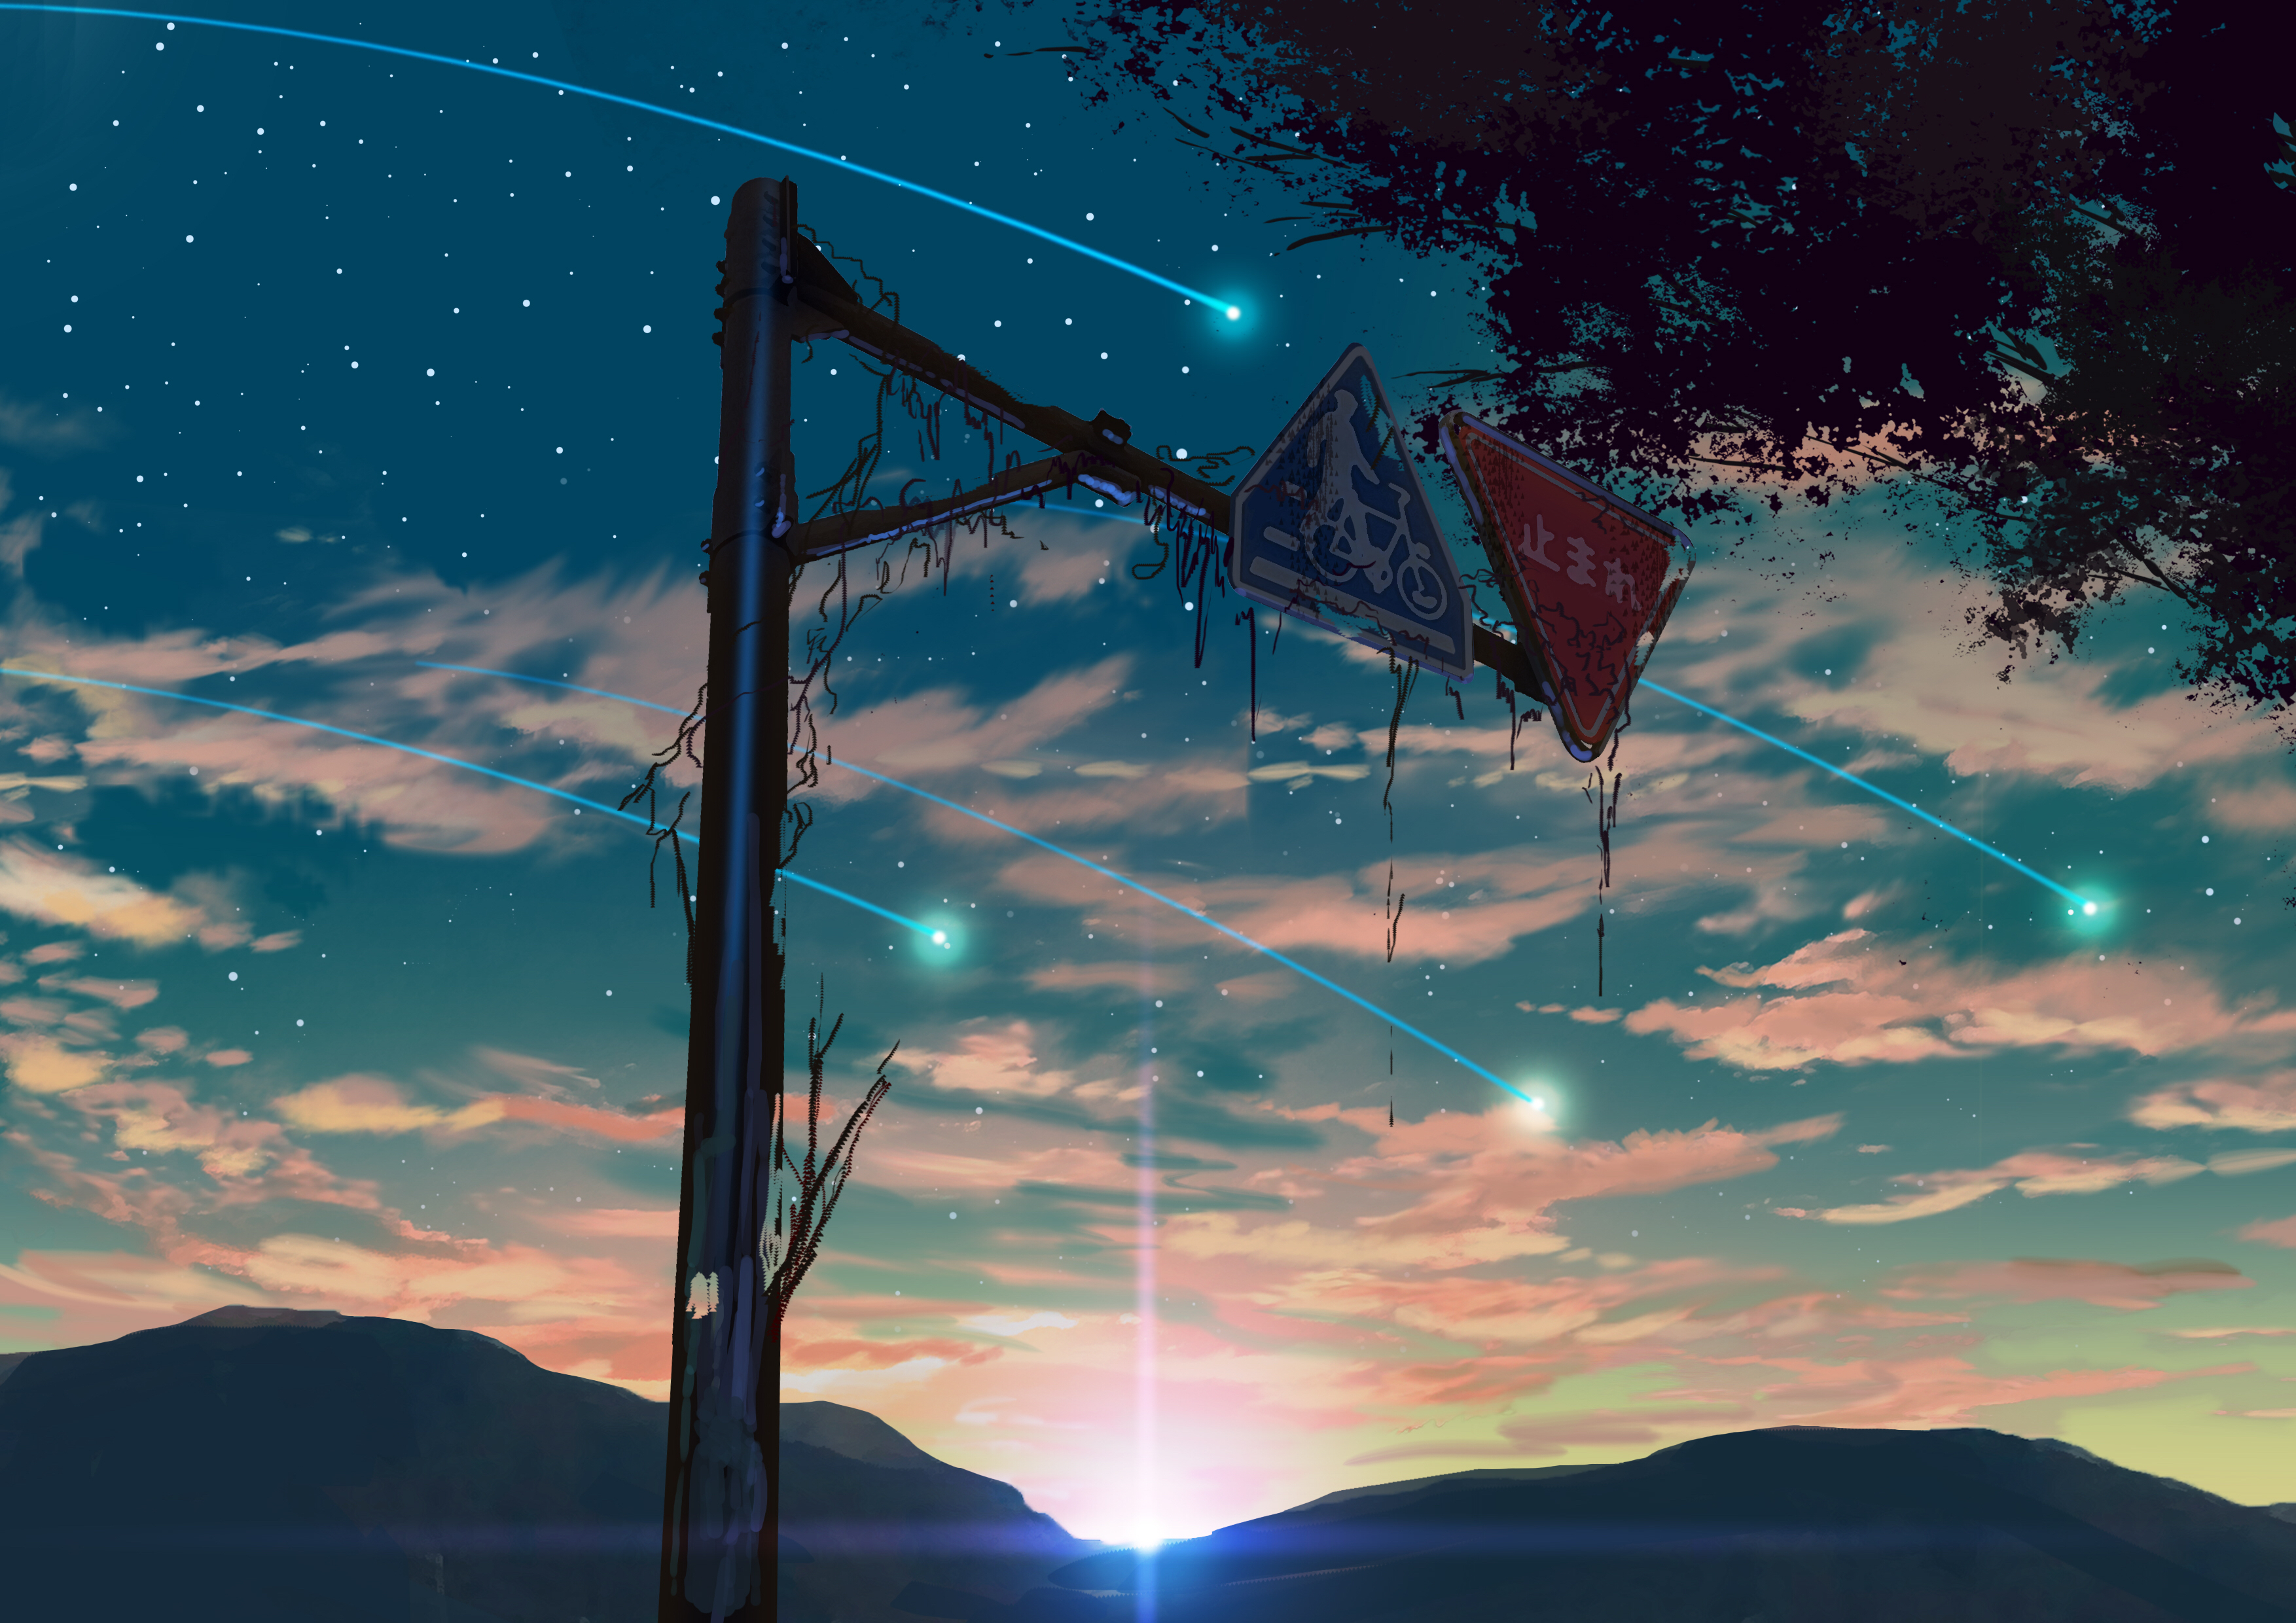 Beautiful night sky with falling stars by スマッシャーT_T